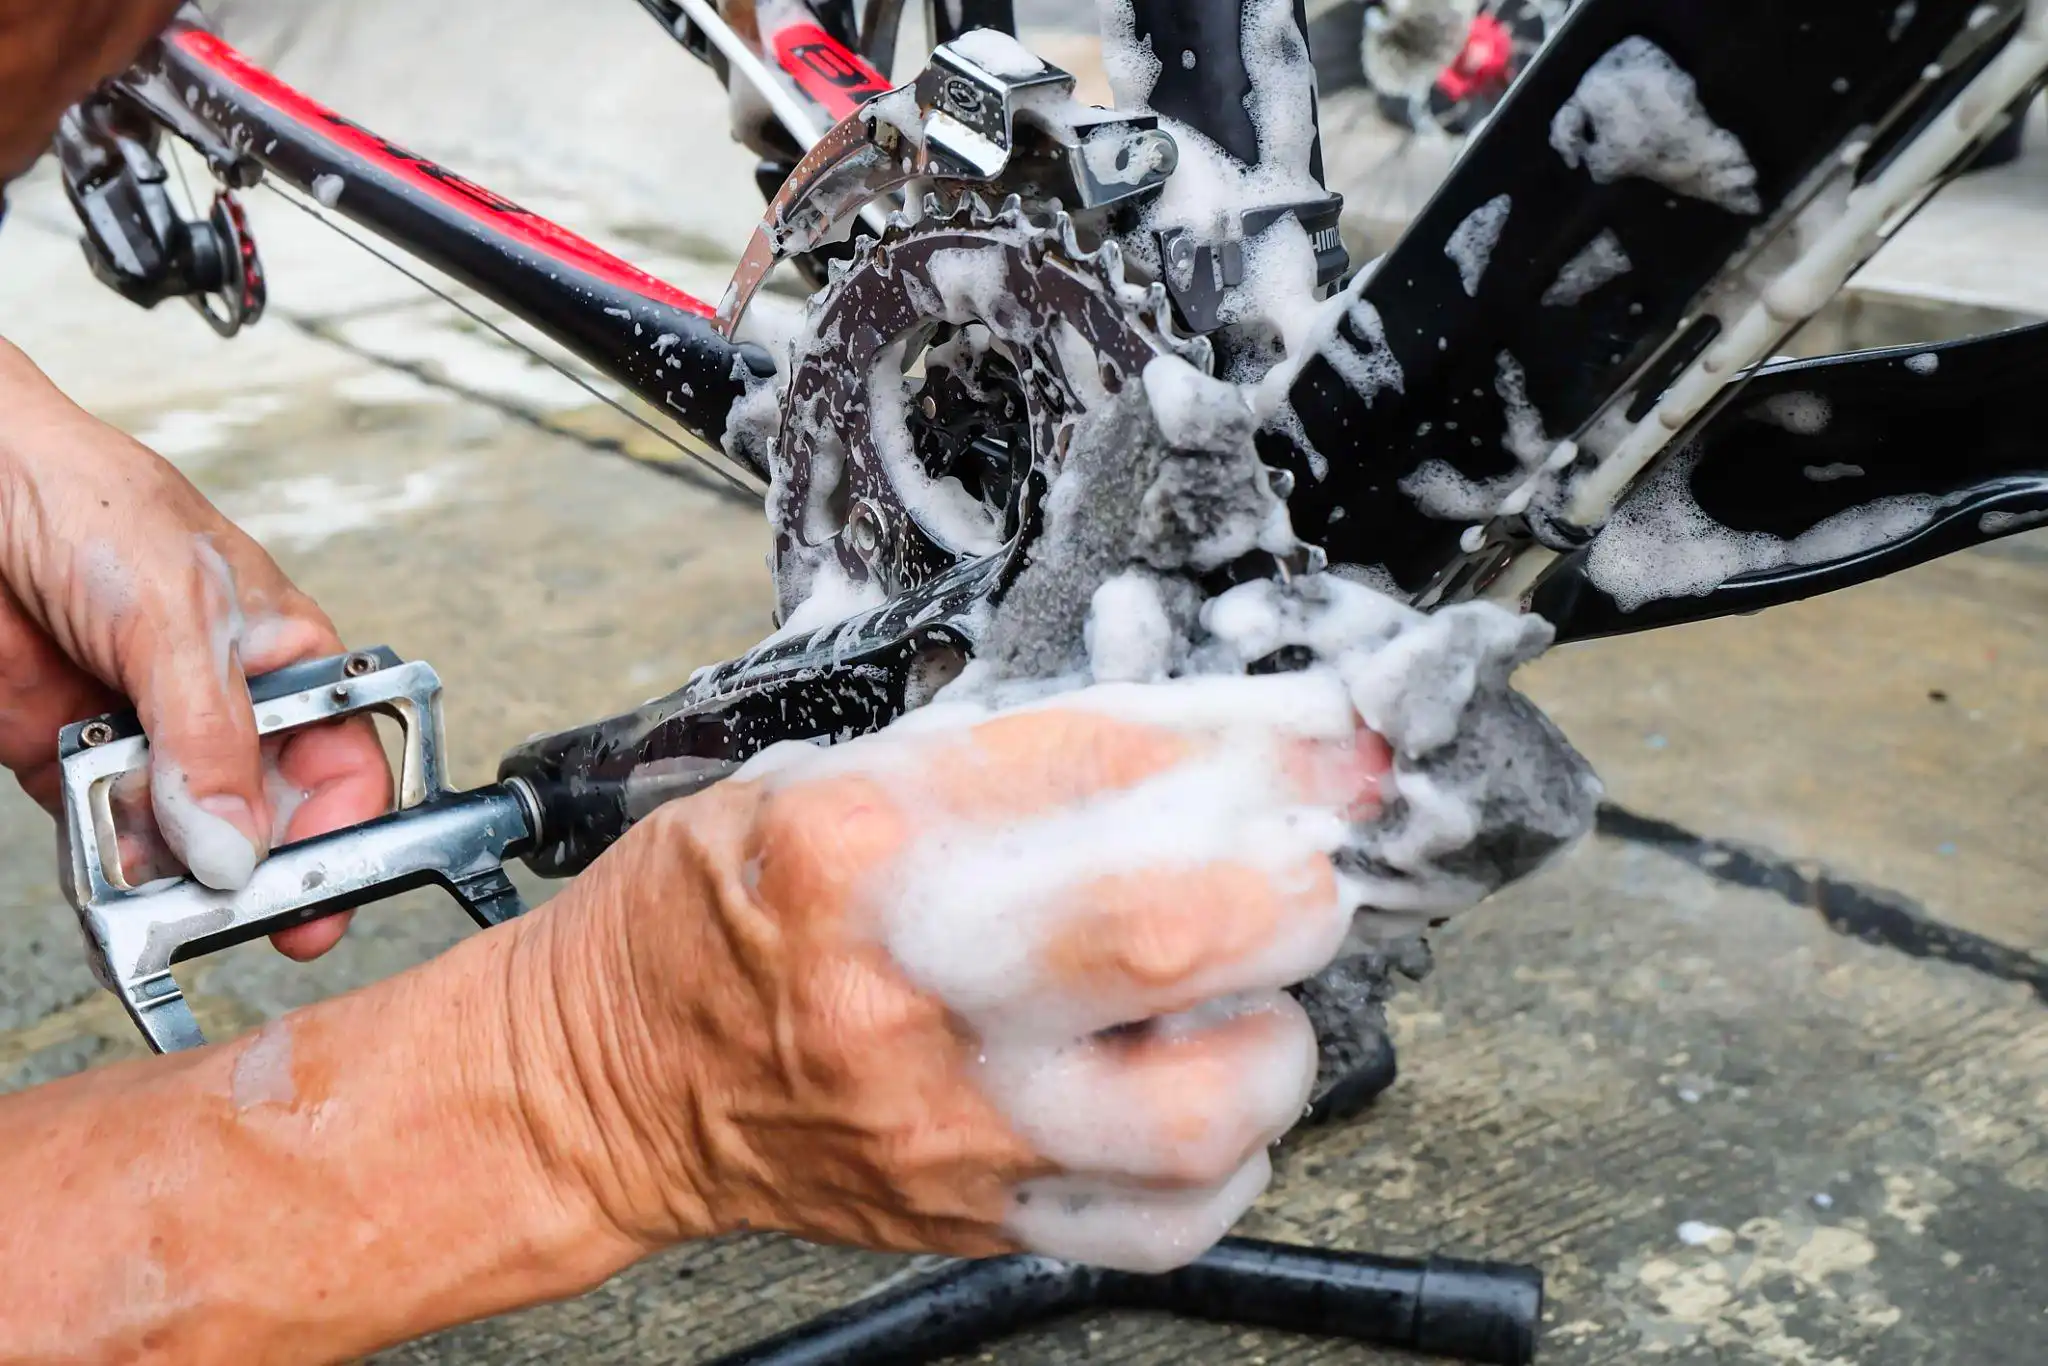 How to Clean Bike Chain without Degreaser? 5+ Alternatives